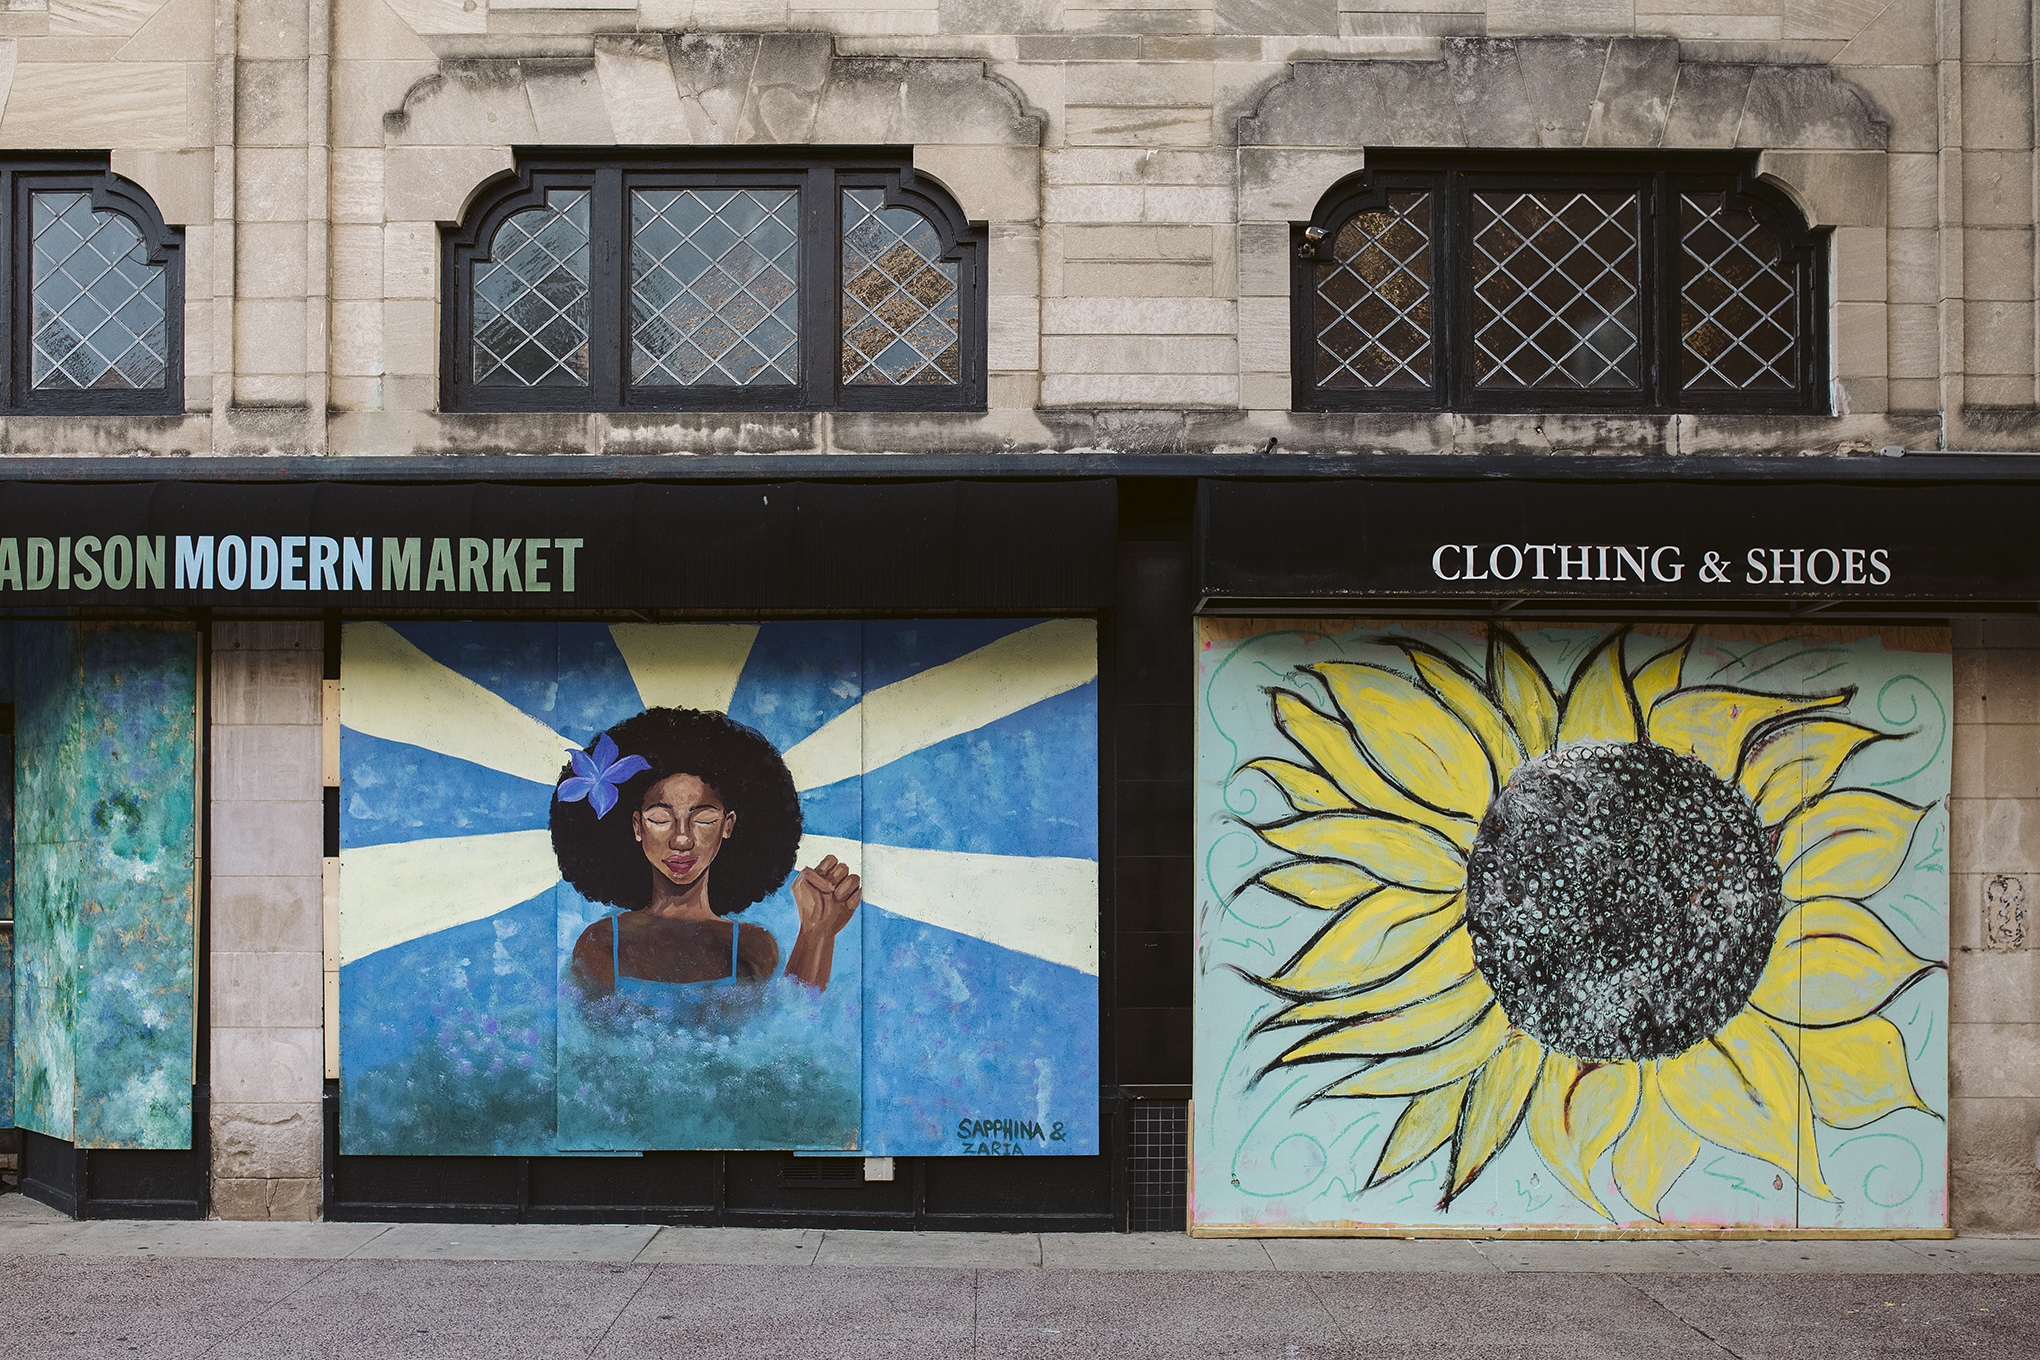 Artwork by Sapphina and Zaria is displayed on boarded up store windows on State Street